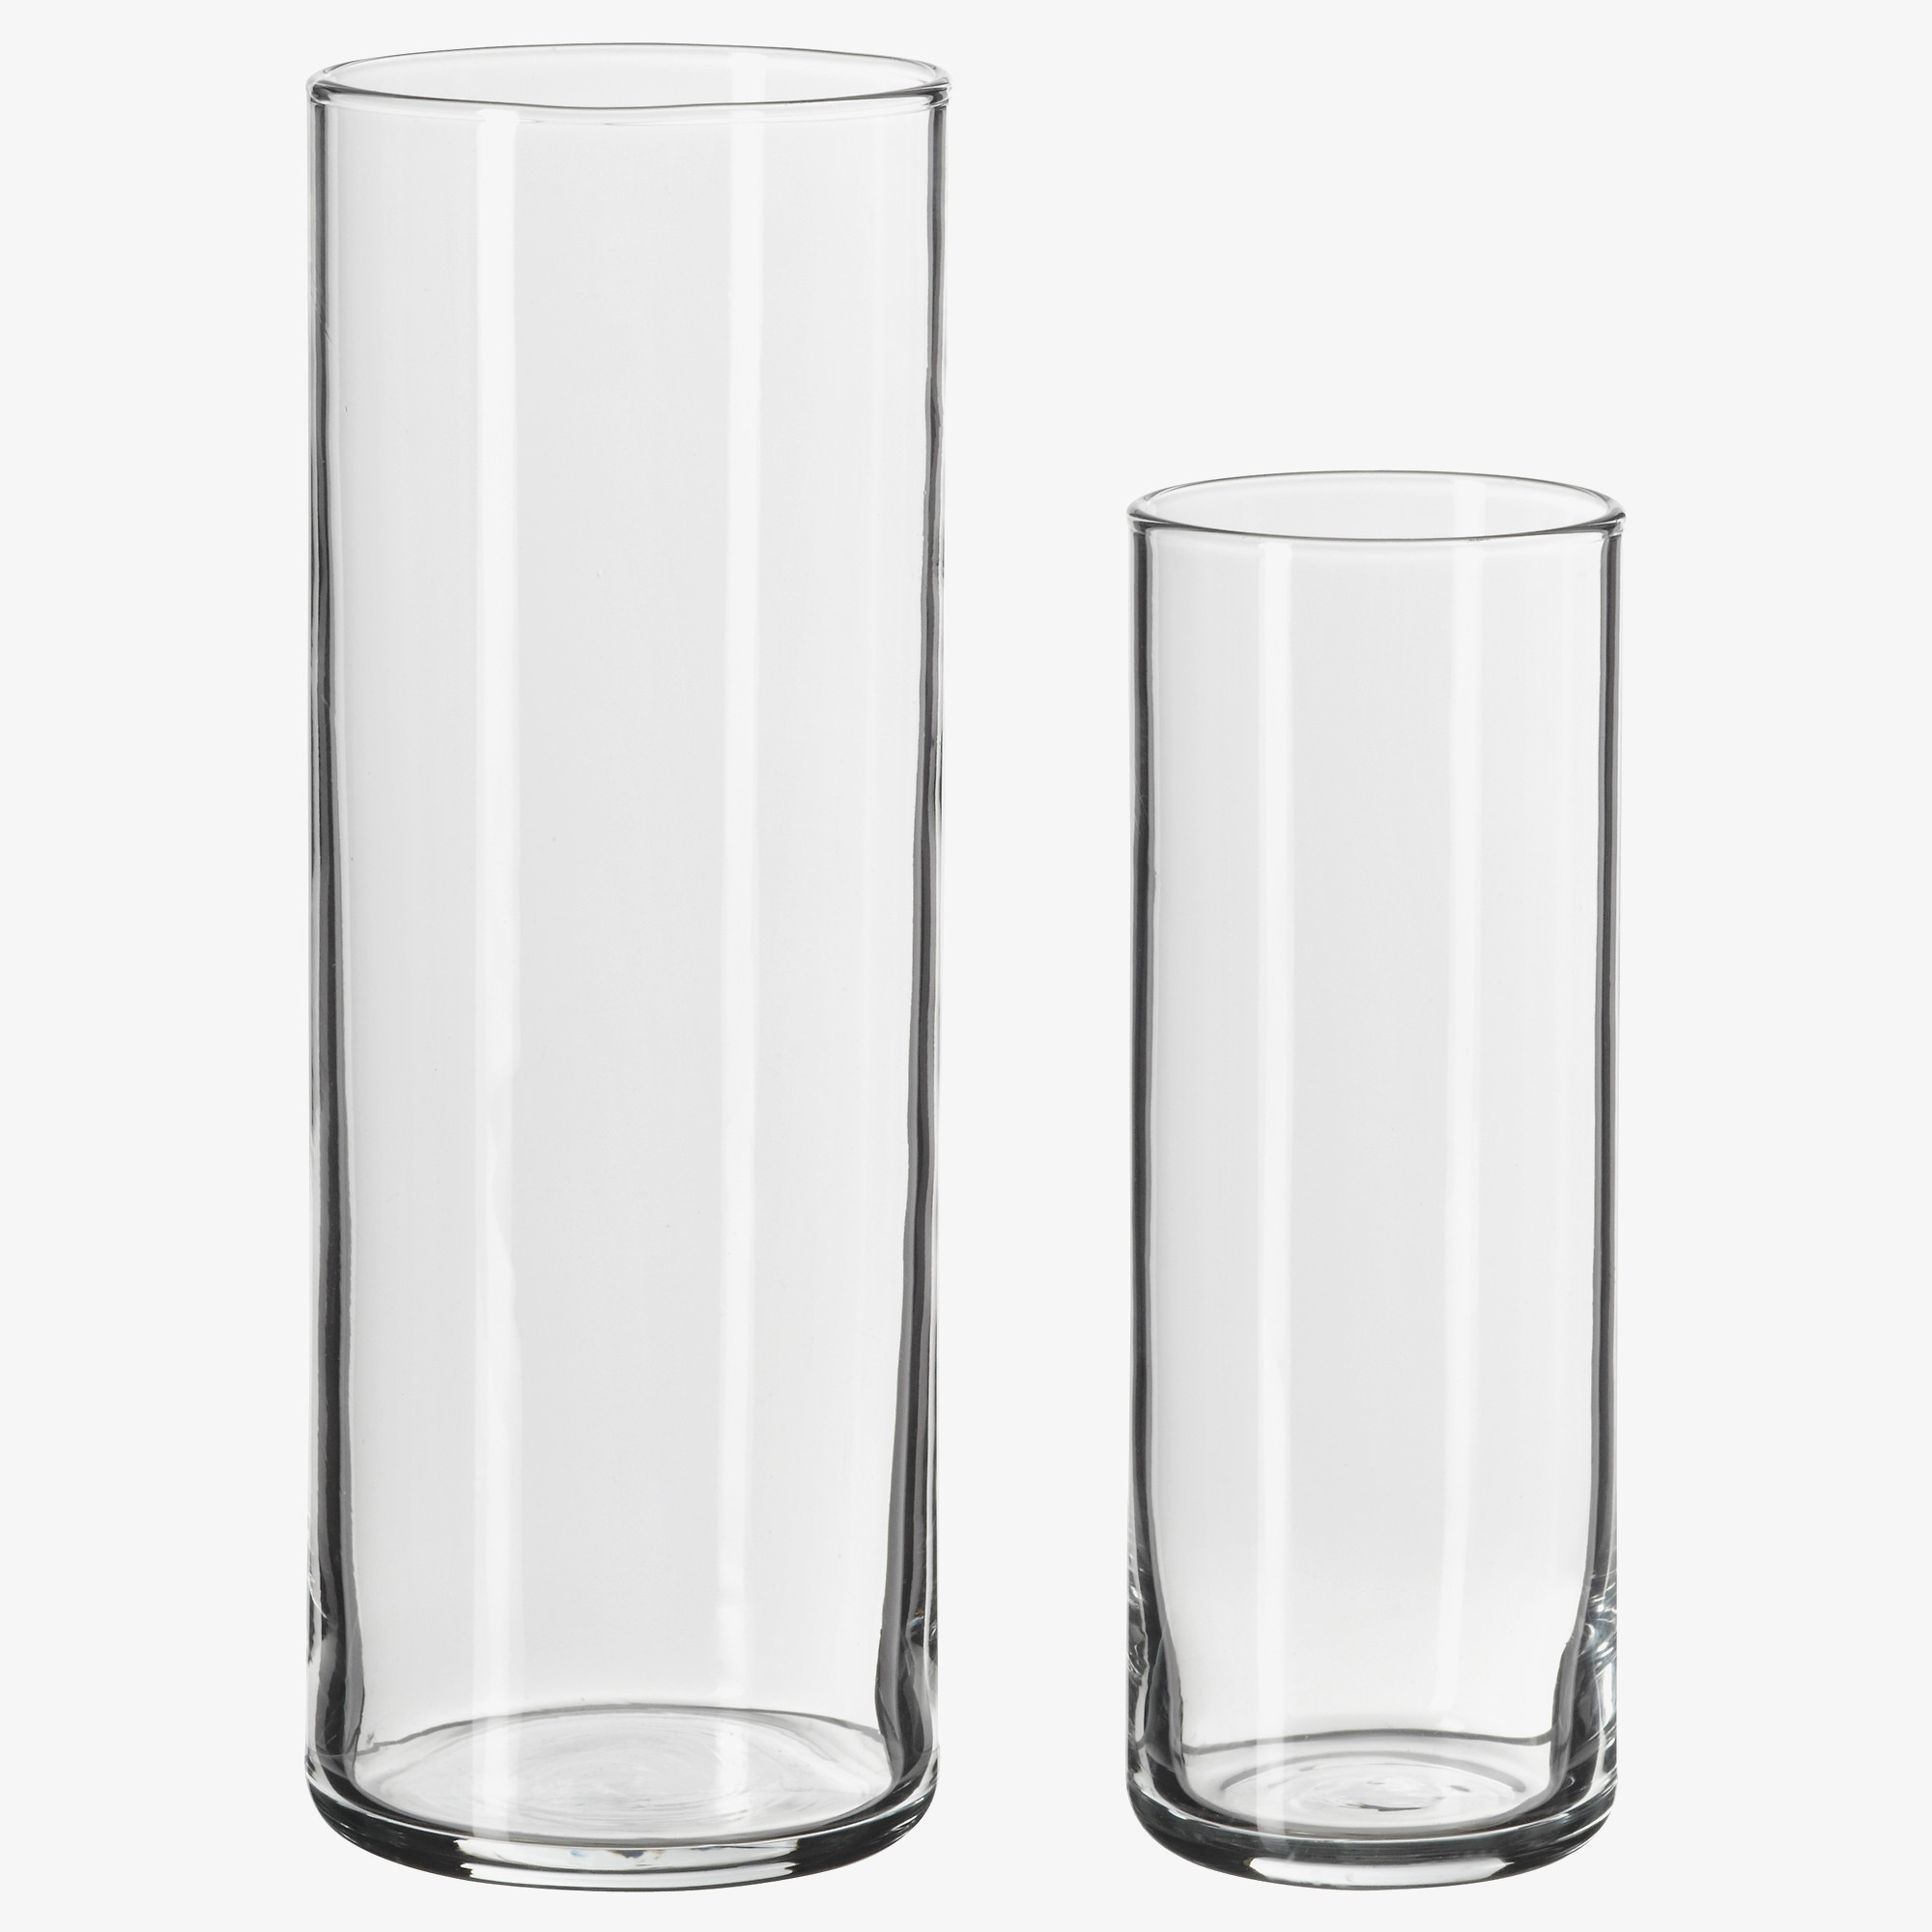 22 Unique Ikea Clear Glass Vases 2024 free download ikea clear glass vases of clear glass tv stand charming new design ikea mantel great pe s5h for clear glass tv stand charming new design ikea mantel great pe s5h vases ikea vase i 0d rektang